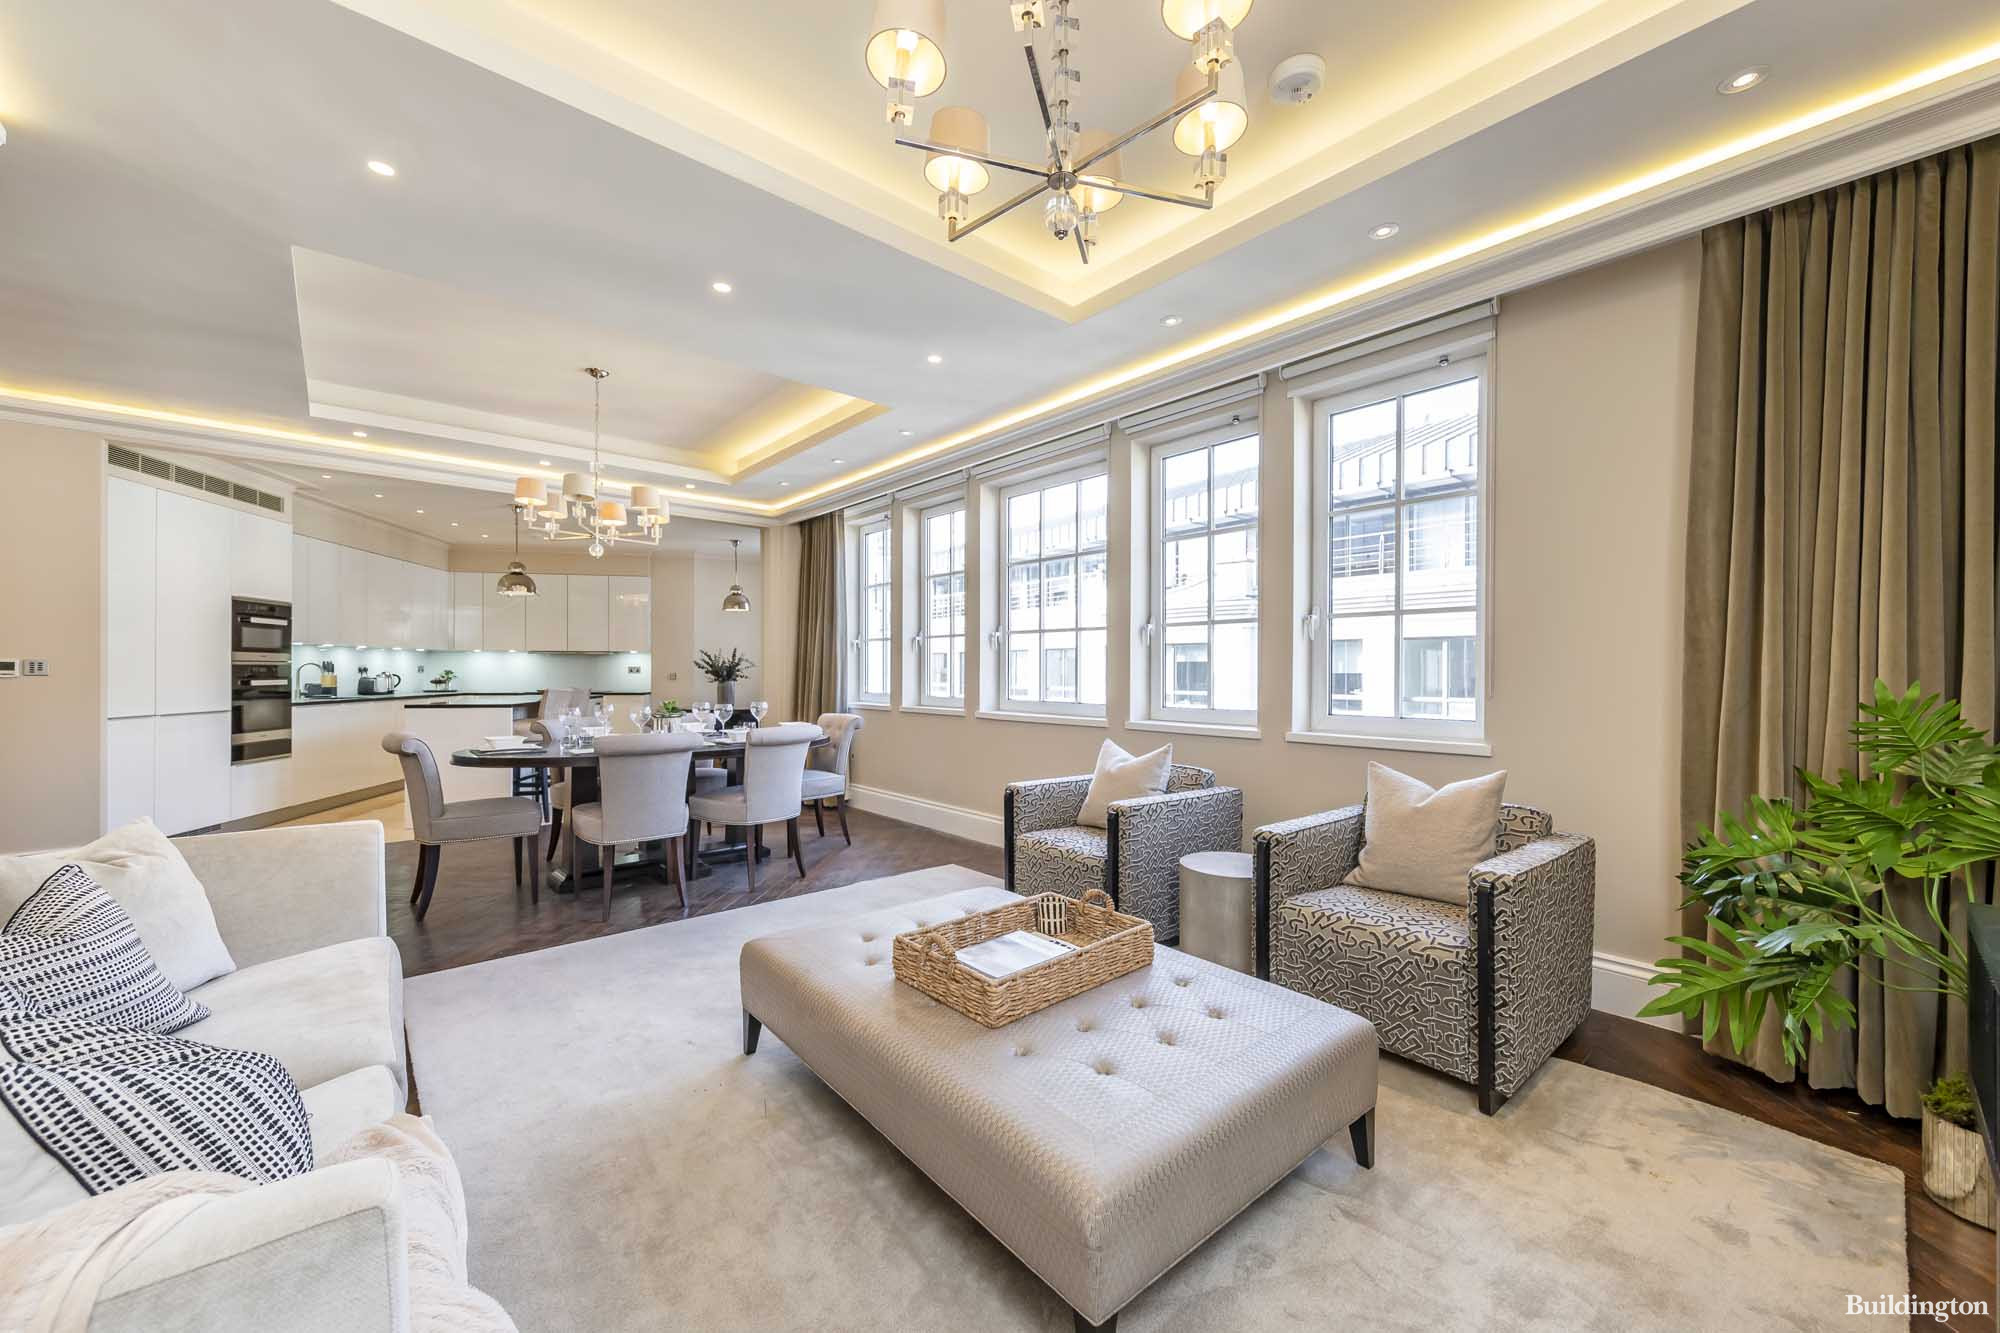 Reception at the four-bedroom duplex penthouse available for rent for £4,000 per week with Mayfair specialists  WETHERELL.